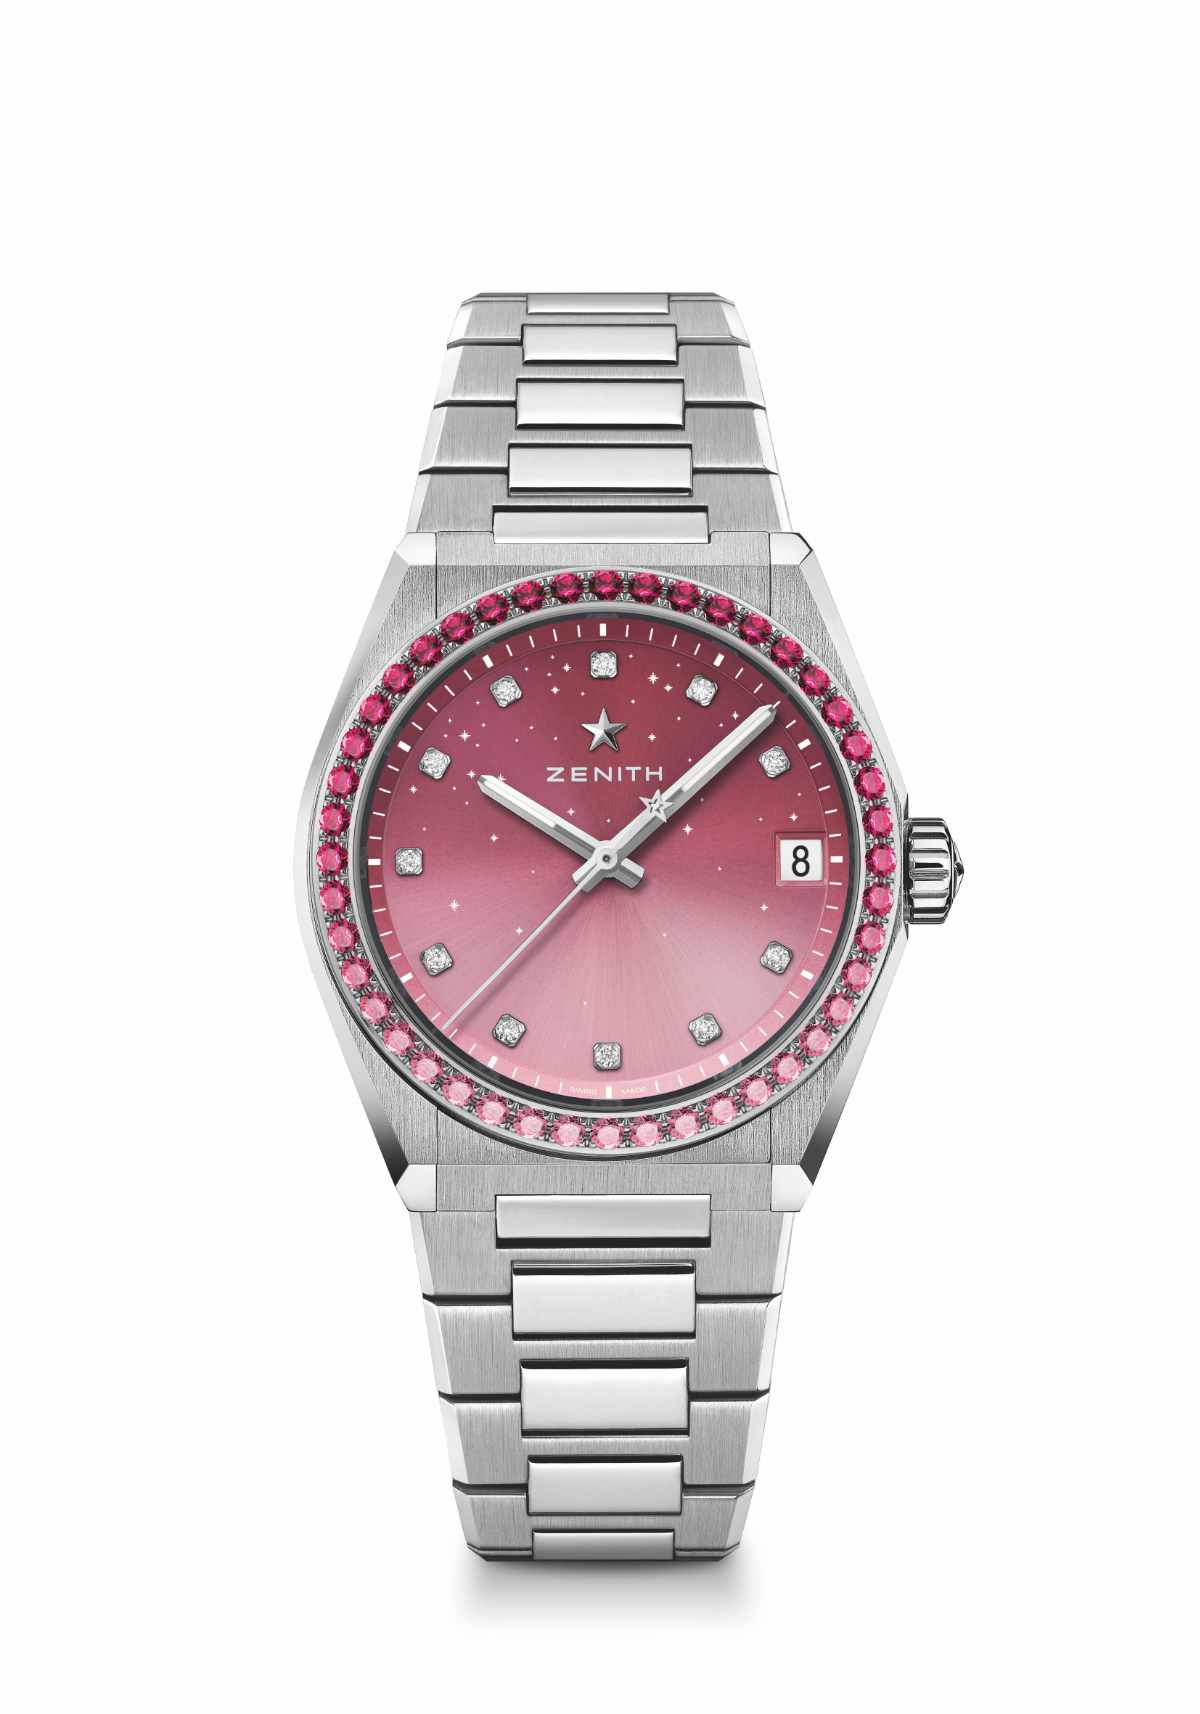 Zenith Continues To Support The Global Movement Of Breast Cancer Awareness